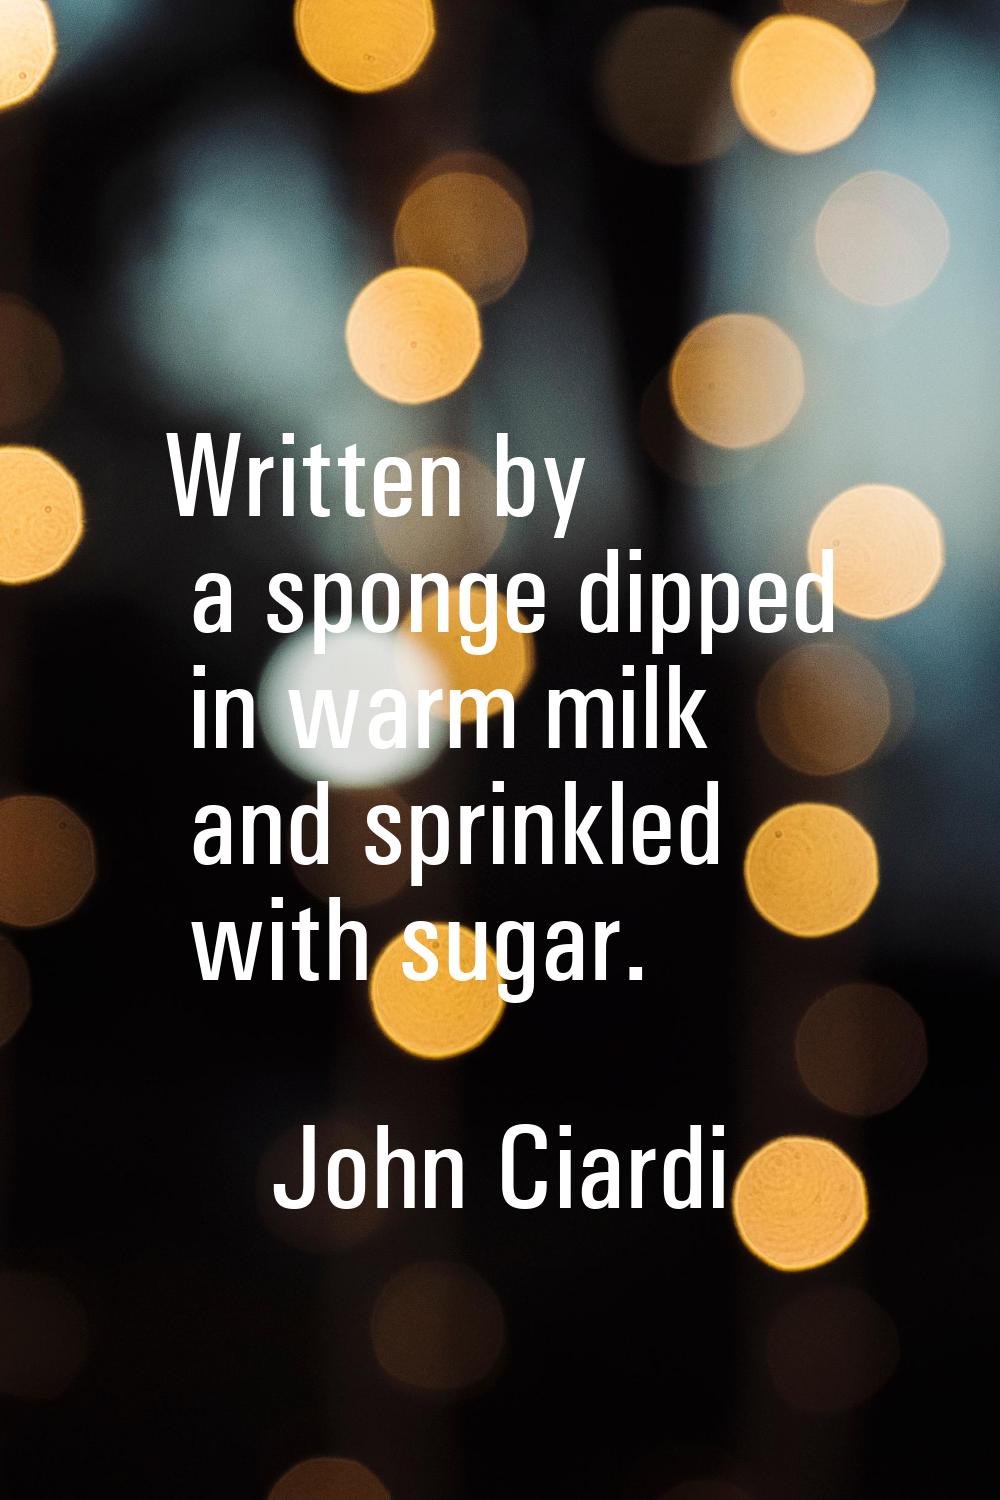 Written by a sponge dipped in warm milk and sprinkled with sugar.